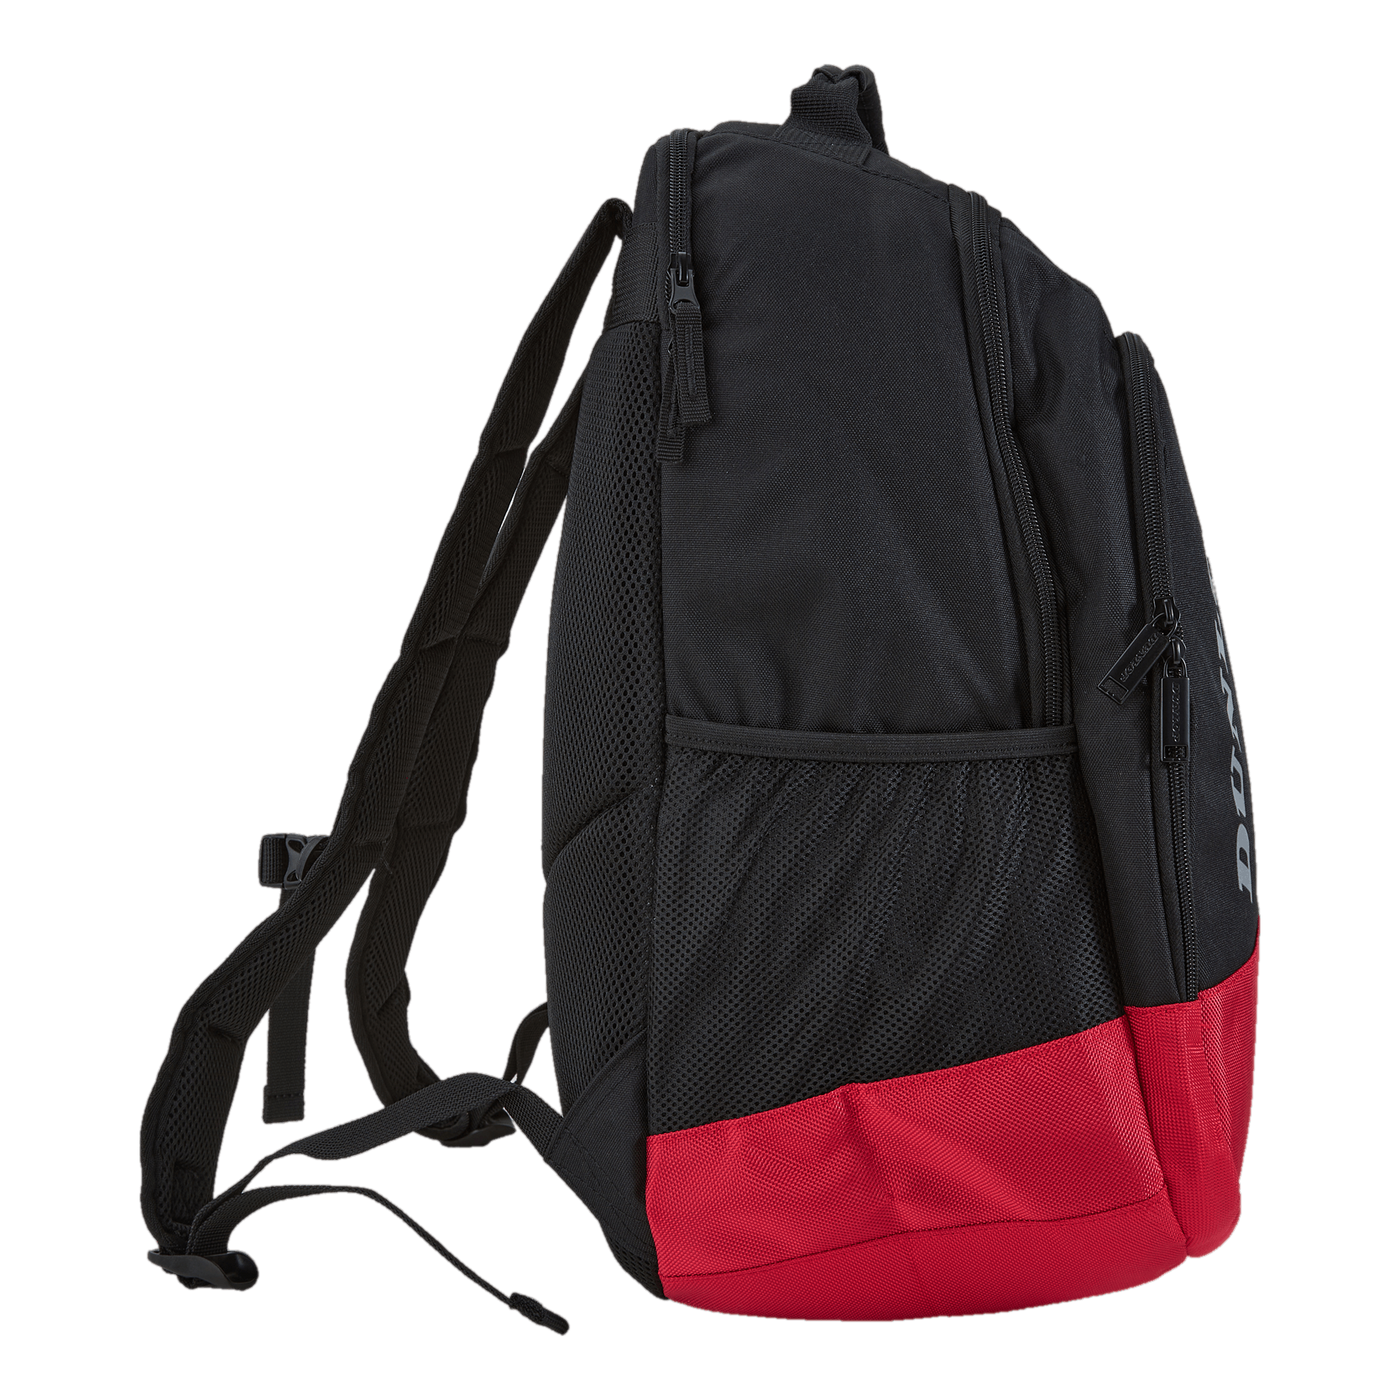 Cx-performance Backpack Black/red